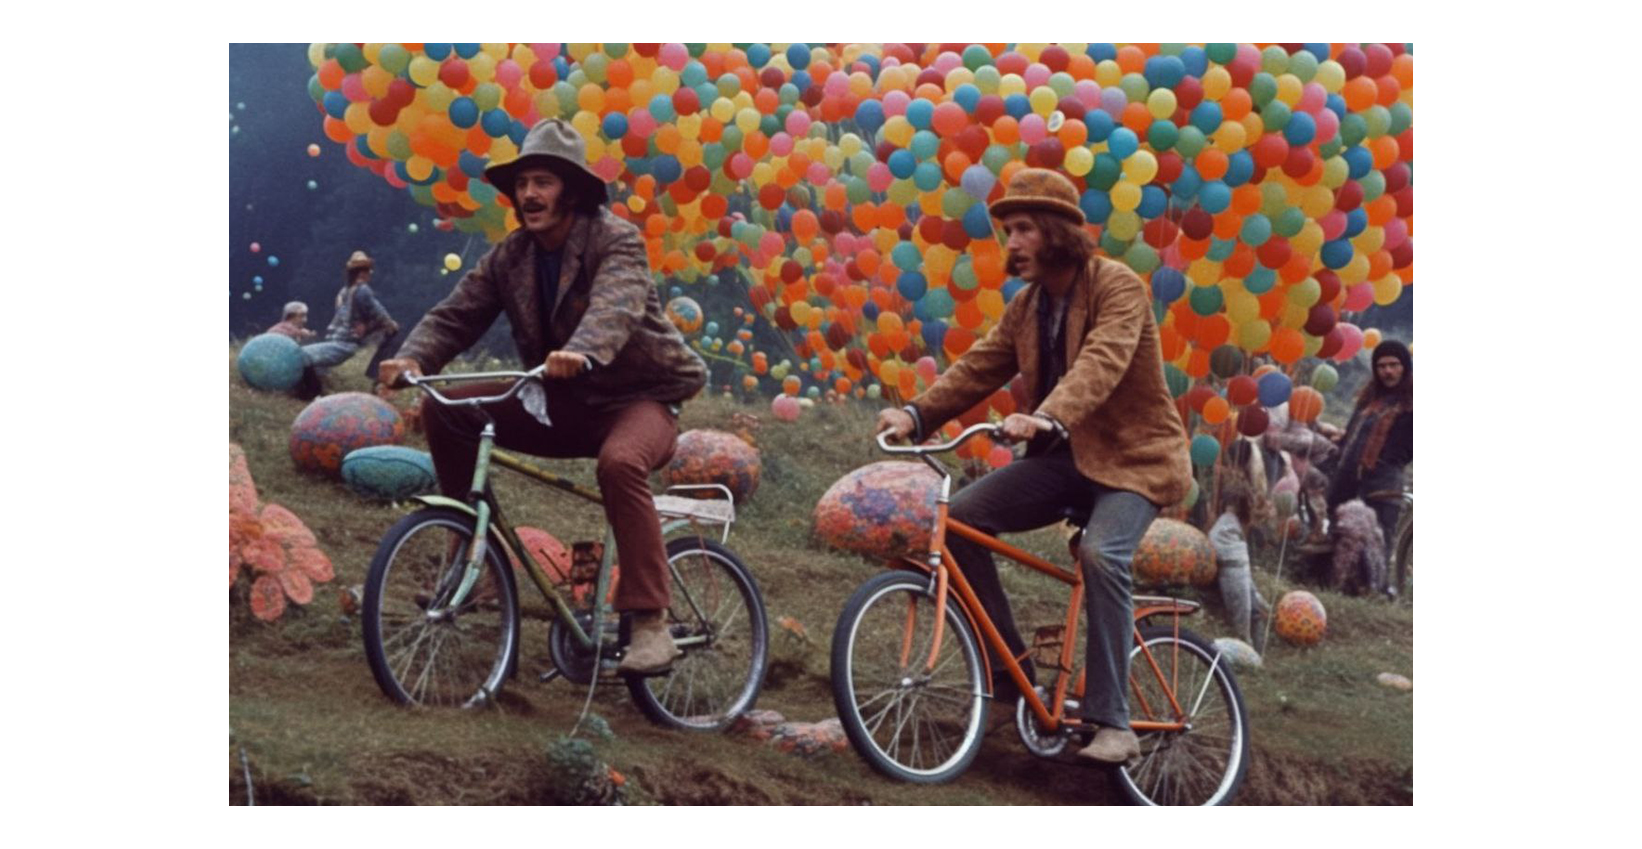 two men riding a bicycle in a festival with lots of balloons in the background